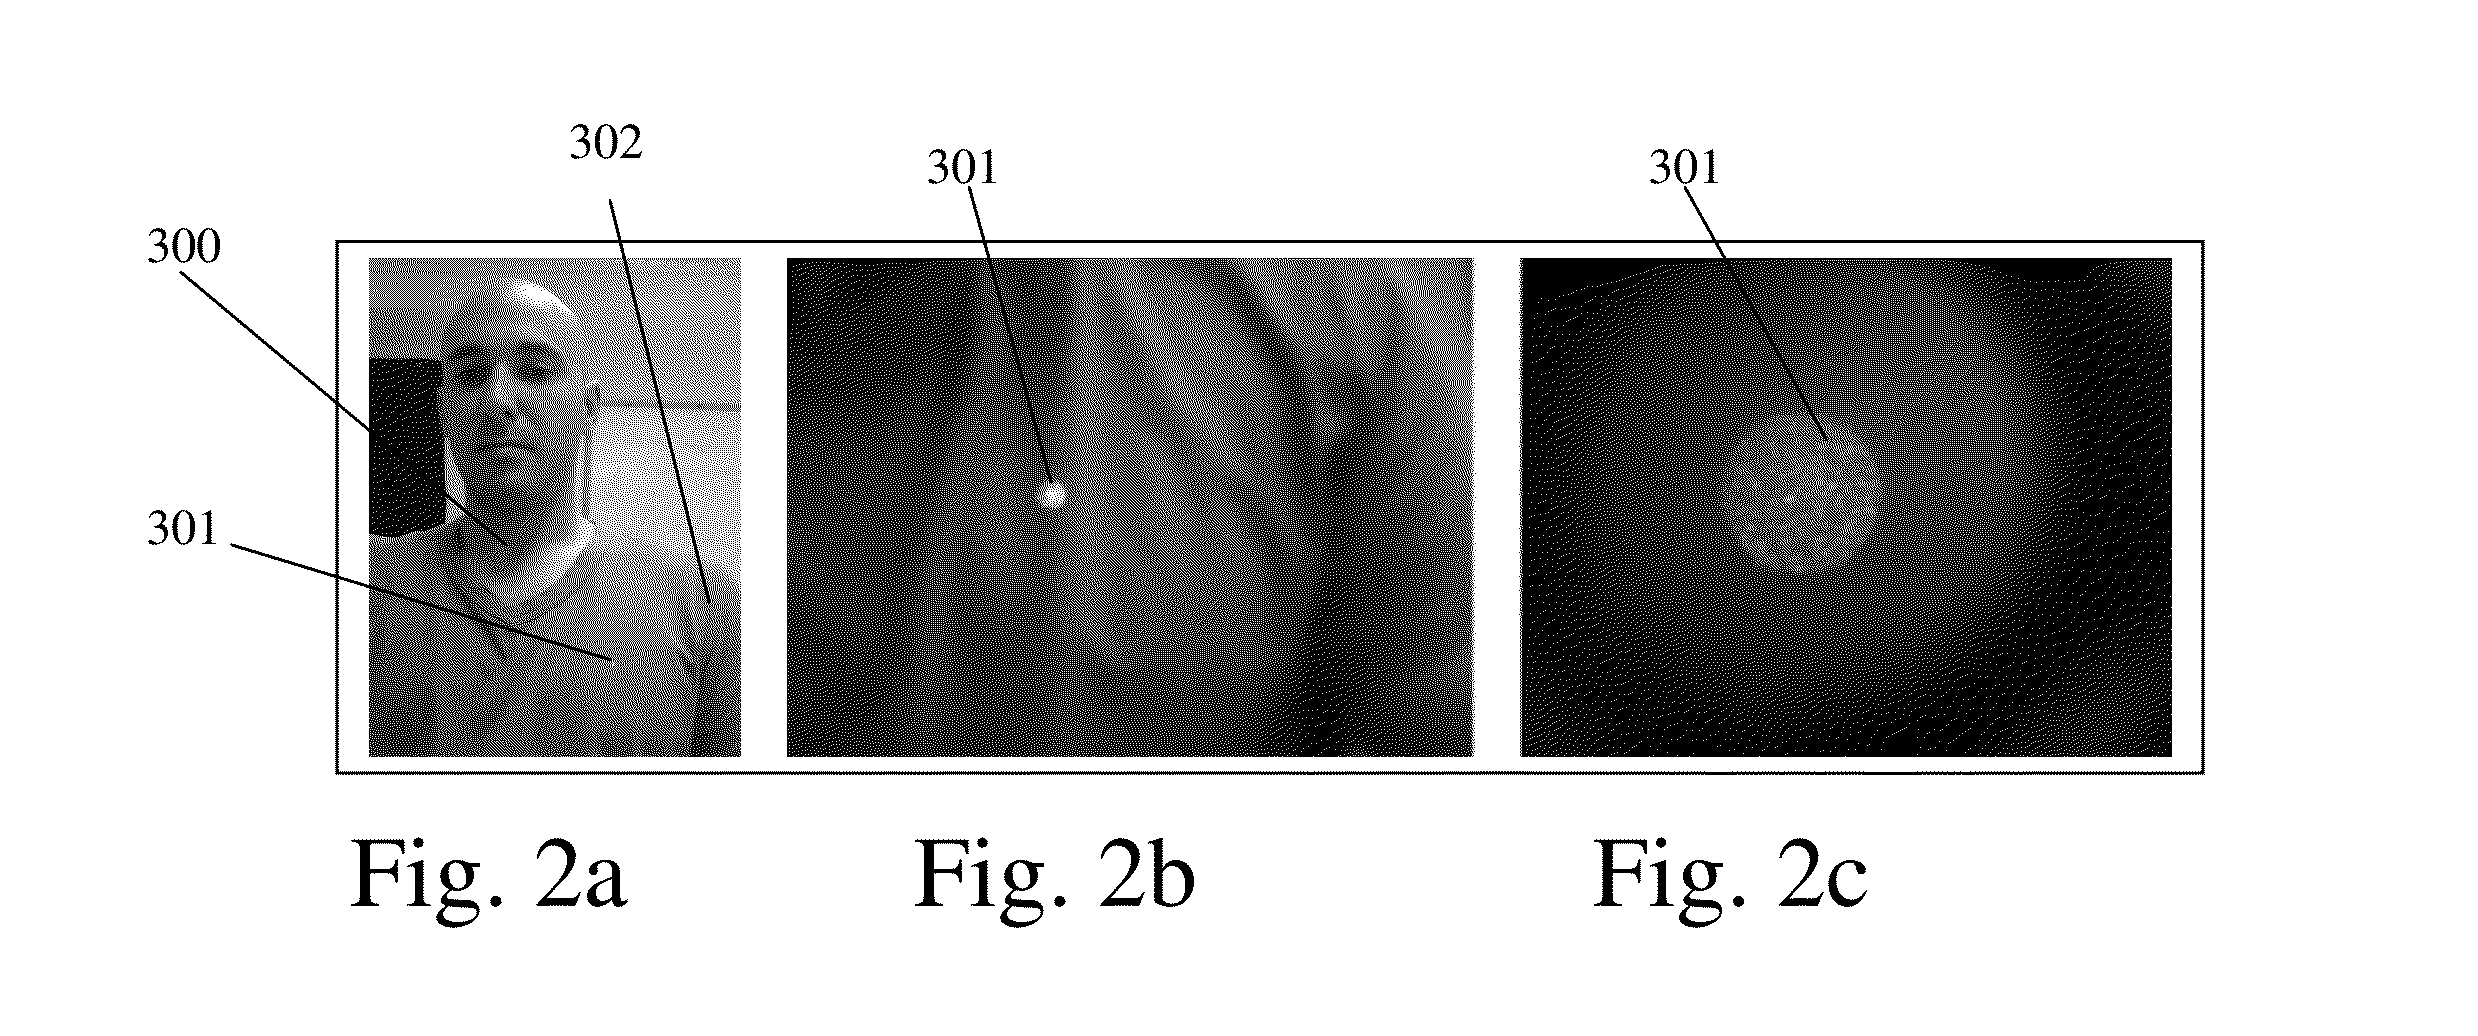 System and Method for Remotely Identifying and Characterizing Life Physiological Signs